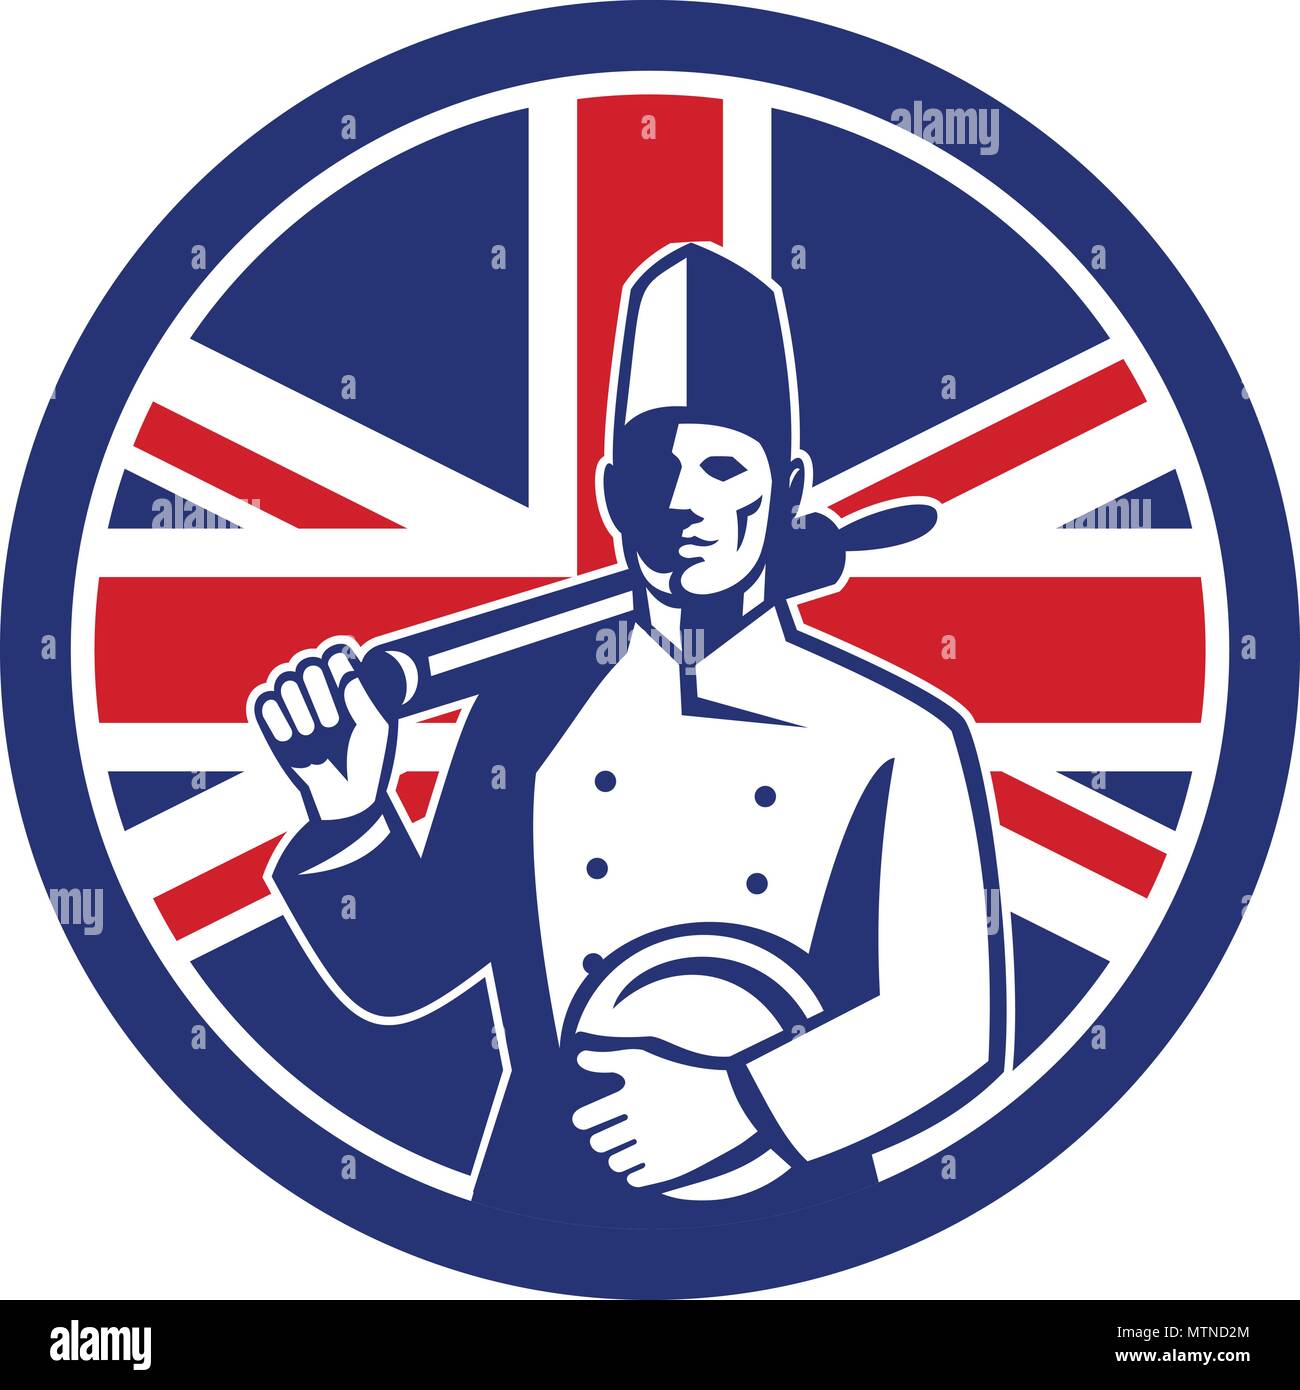 Icon retro style illustration of a British baker, chef or cook holding a rolling pin and plate with United Kingdom UK, Great Britain Union Jack flag s Stock Vector